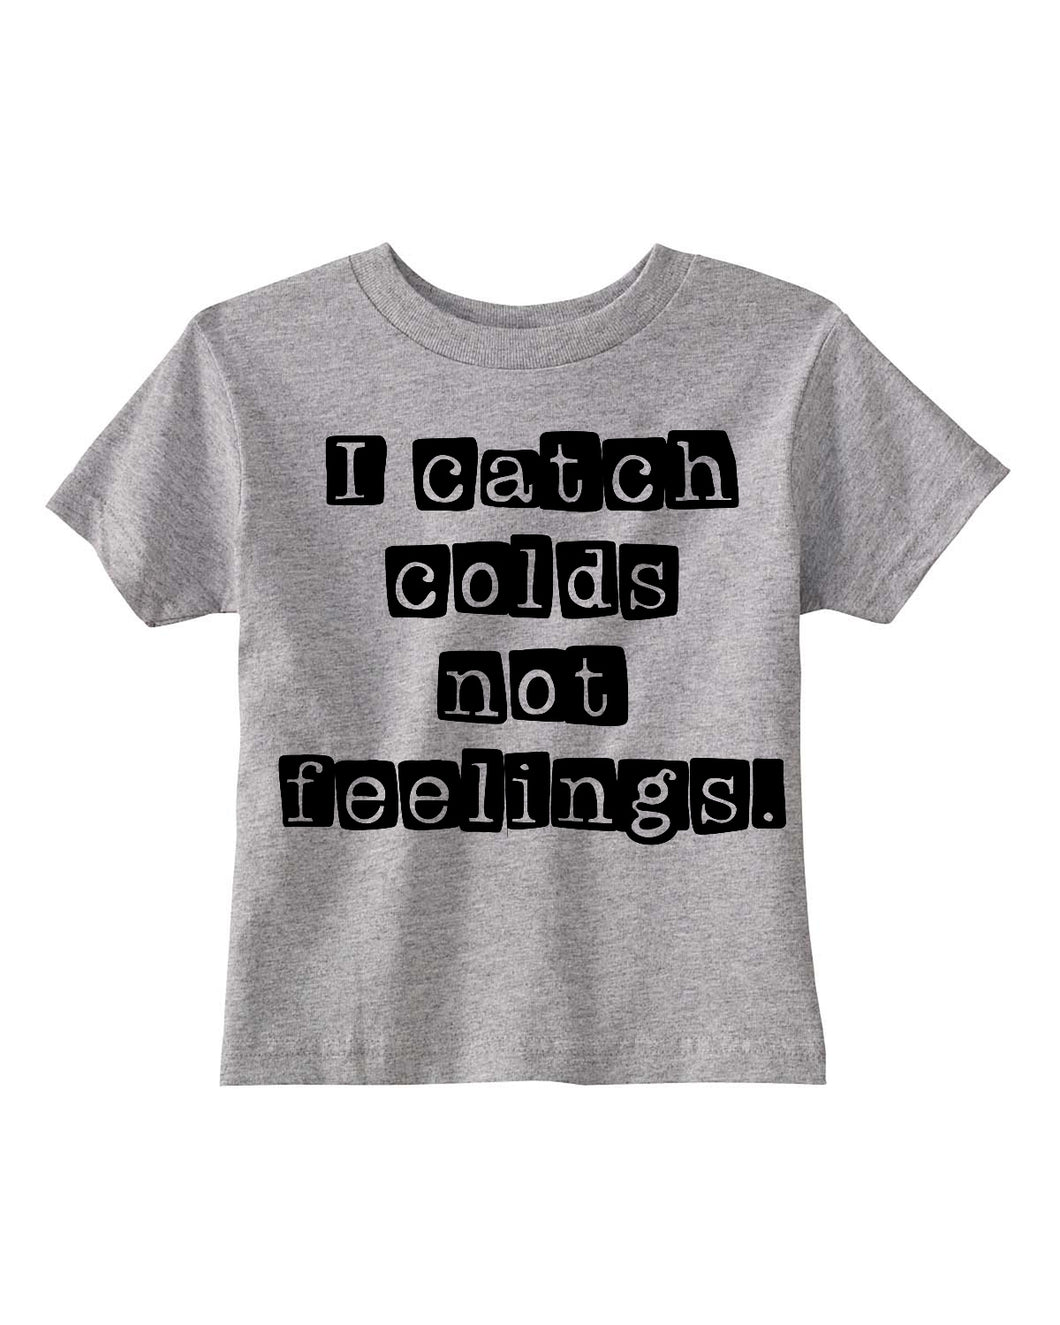 I Catch Colds, Not Feelings Kids Tee- Discontinued